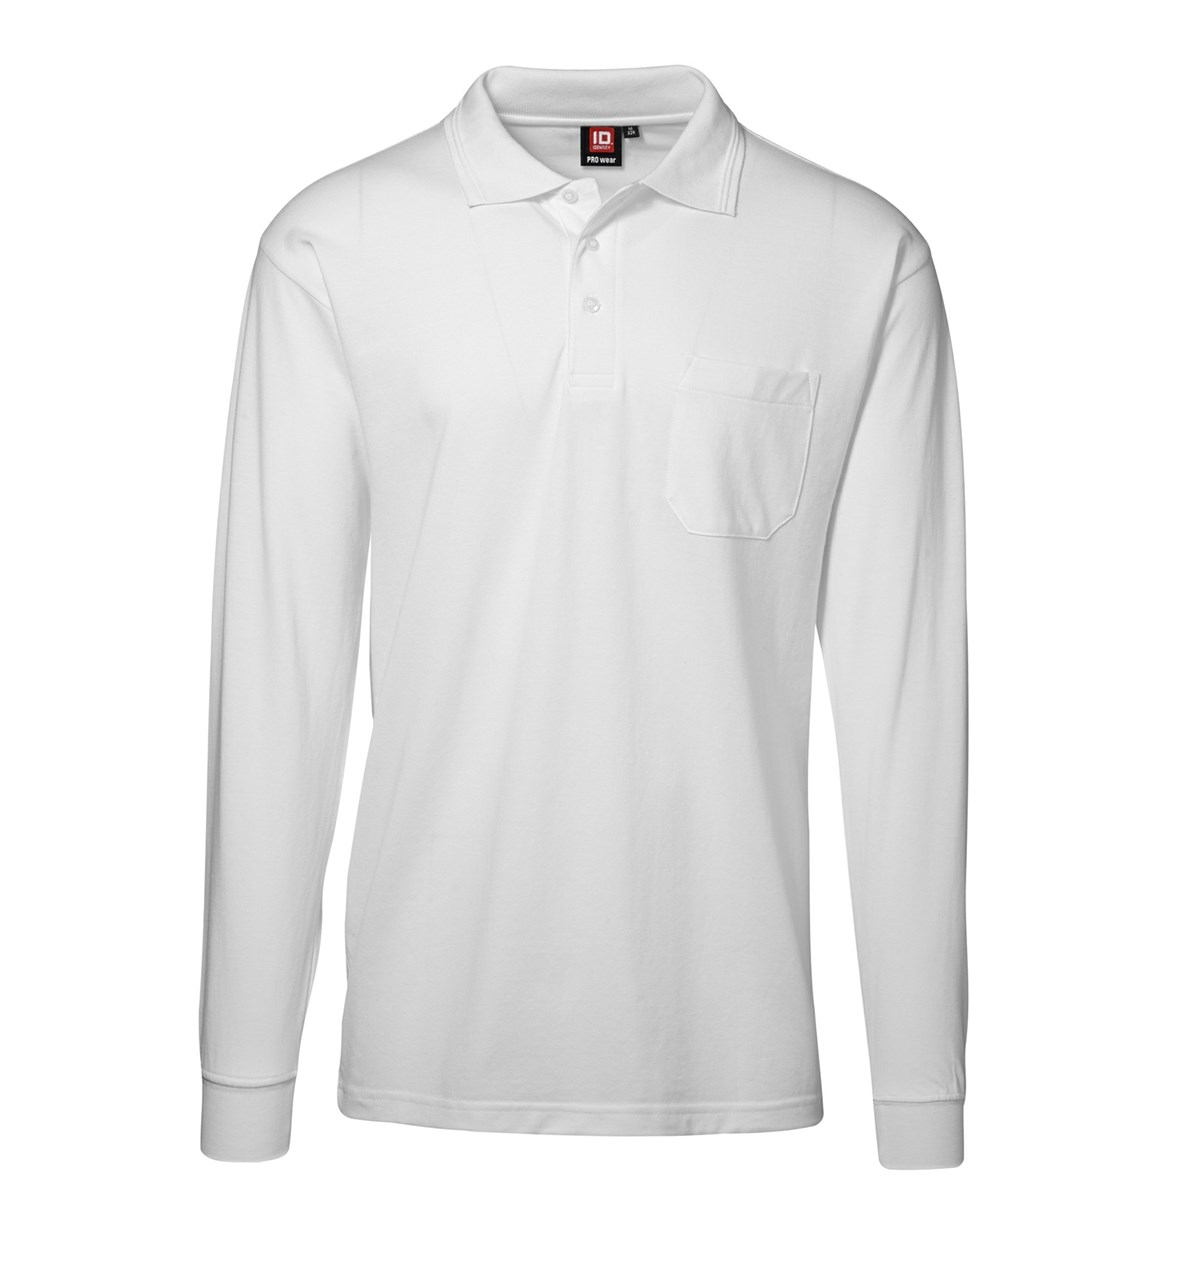 Picture of Pro Wear Poloshirt with pocket